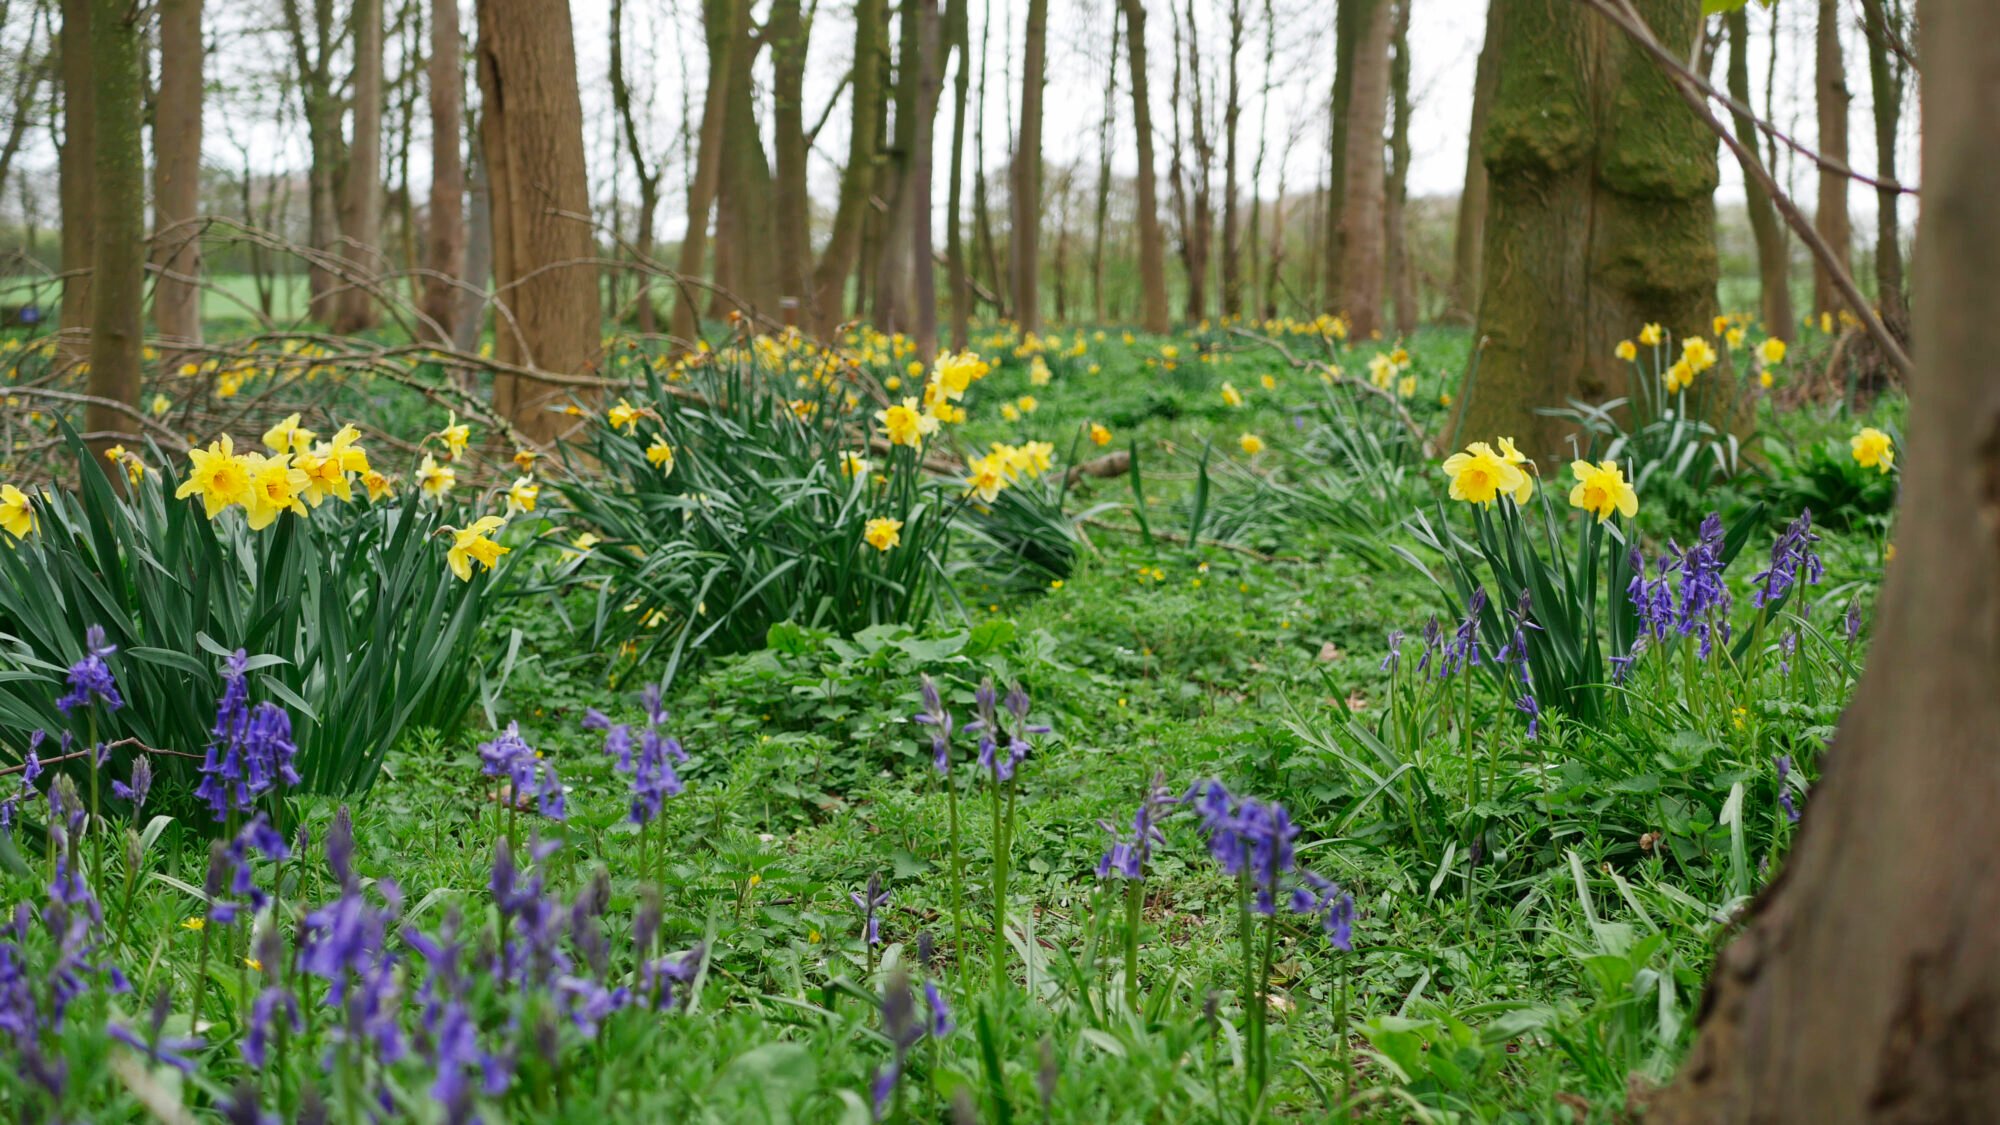 Image name daffodils at burton constable arboretum near hull the 10 image from the post Open Weekend @ Burton Constable Holiday Park & Arboretum in Yorkshire.com.